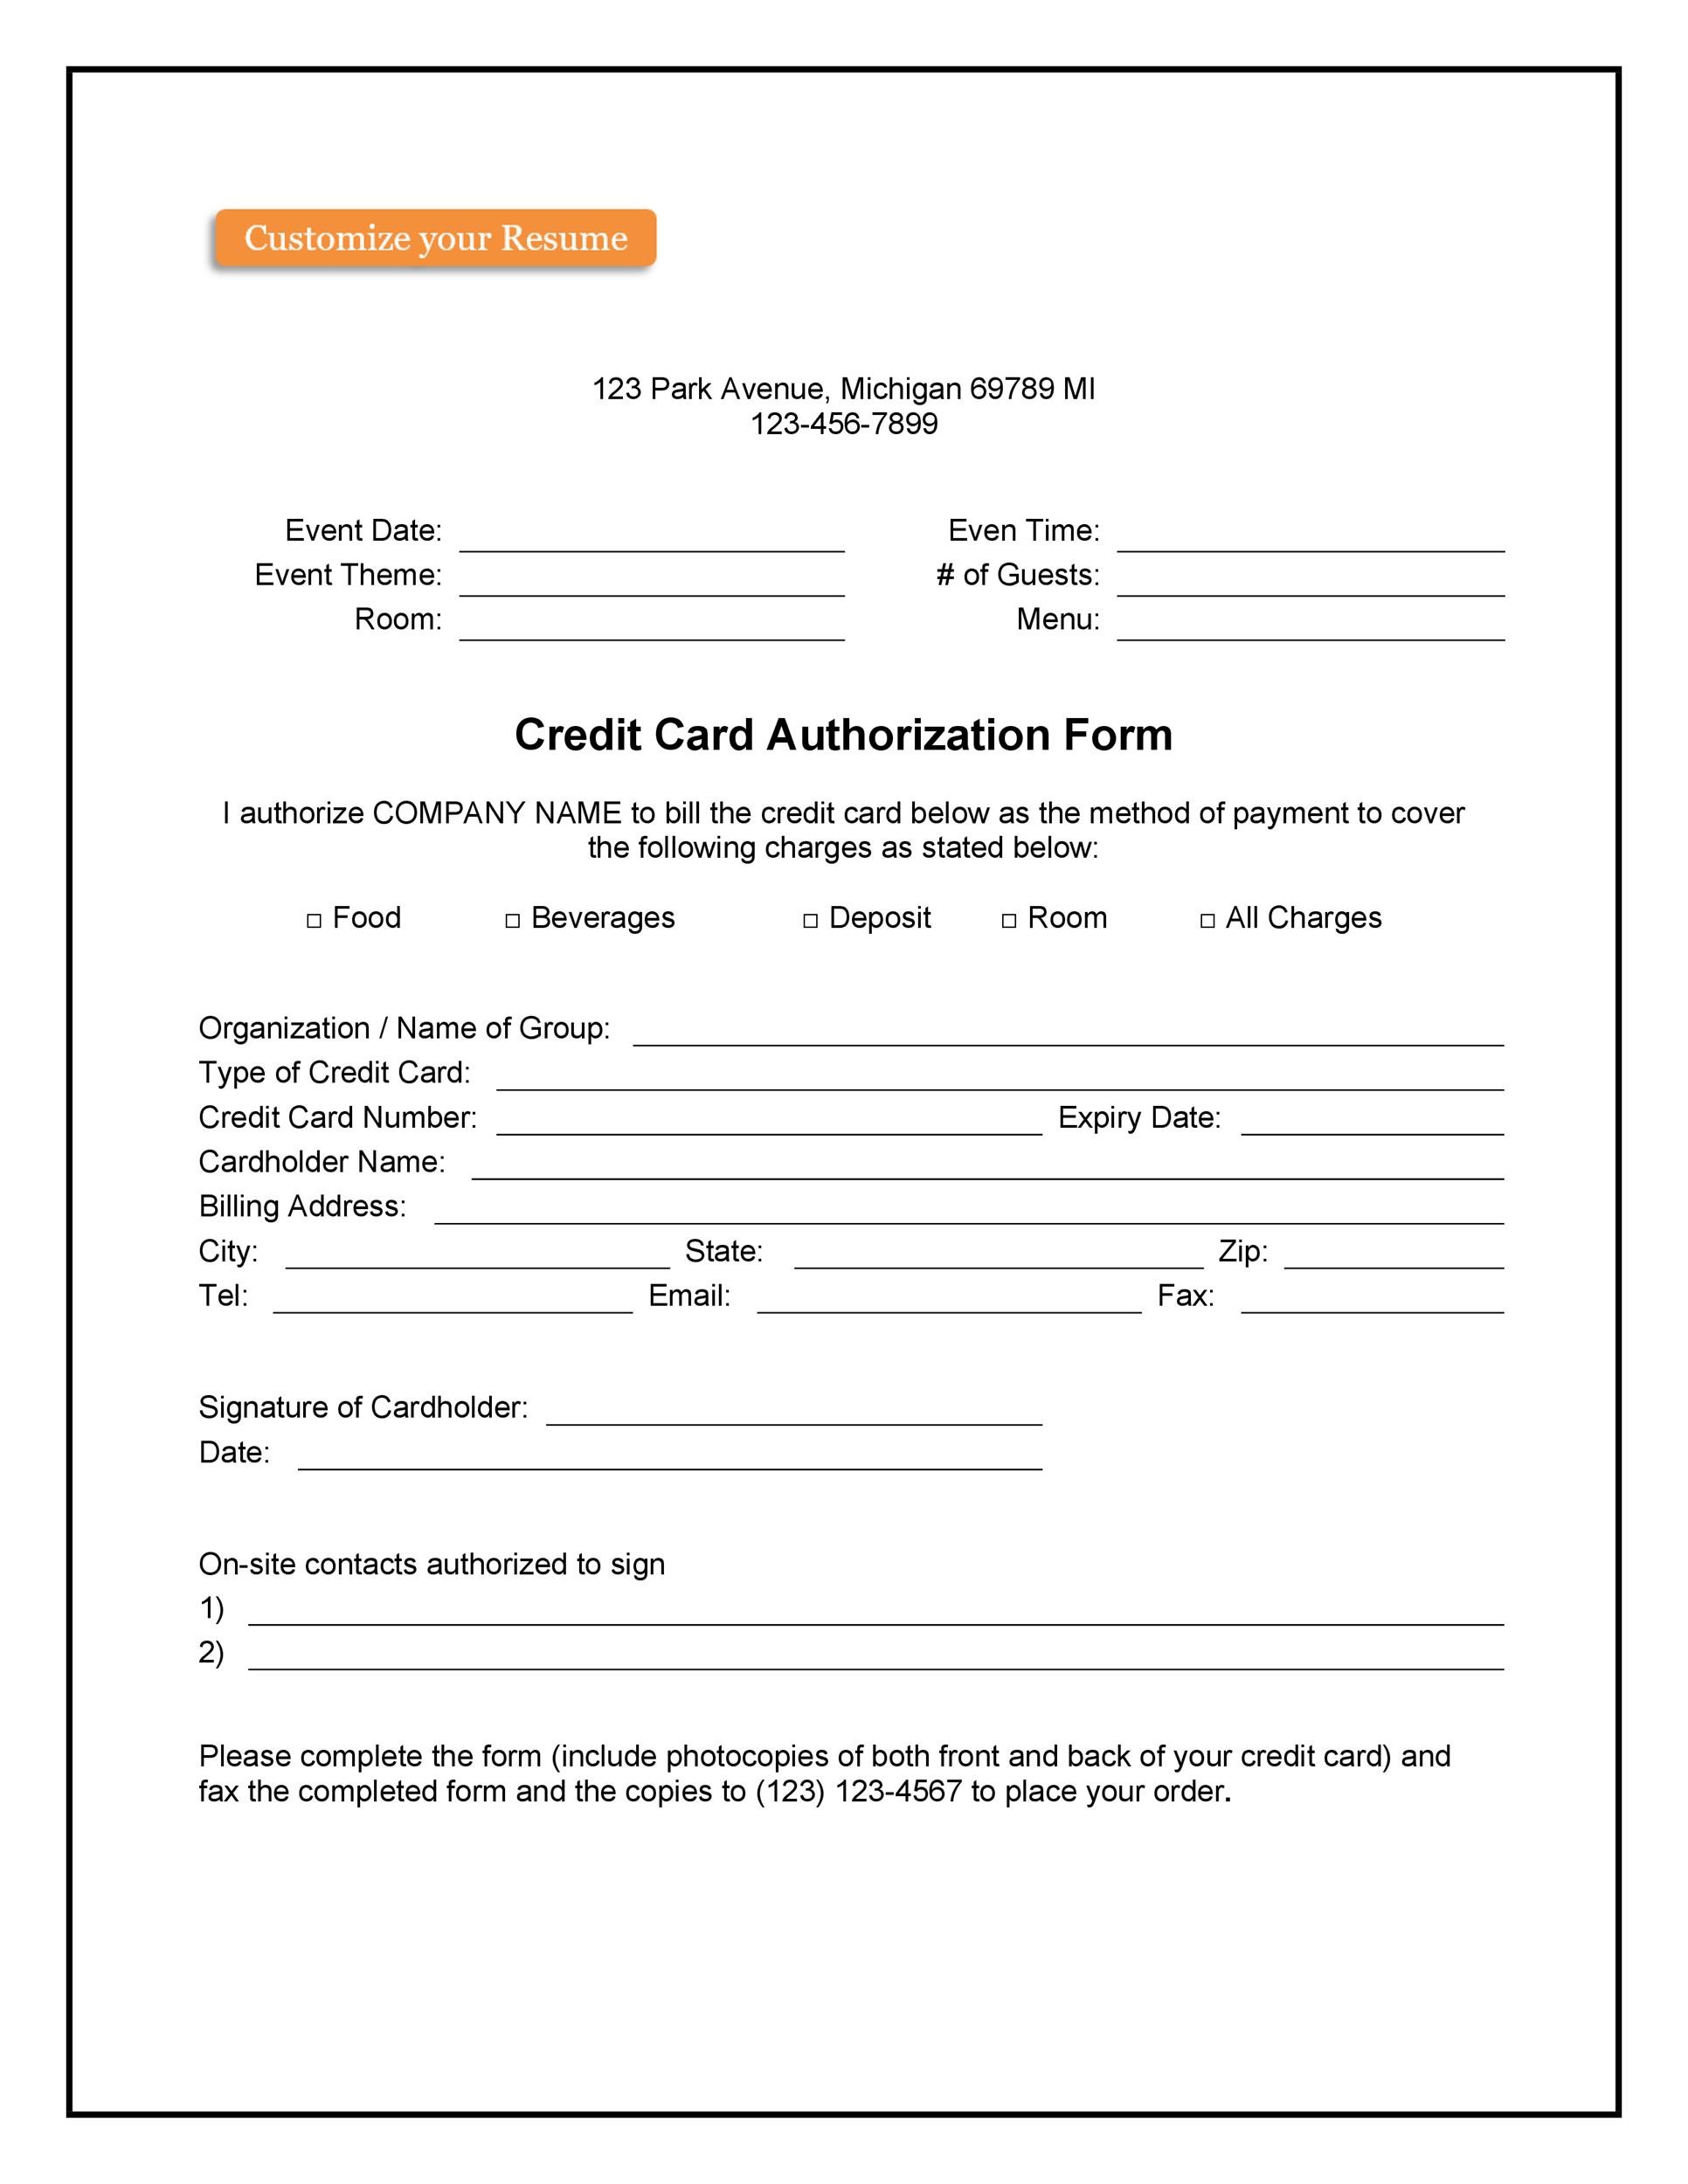 41 Credit Card Authorization Forms Templates Ready To Use 1408